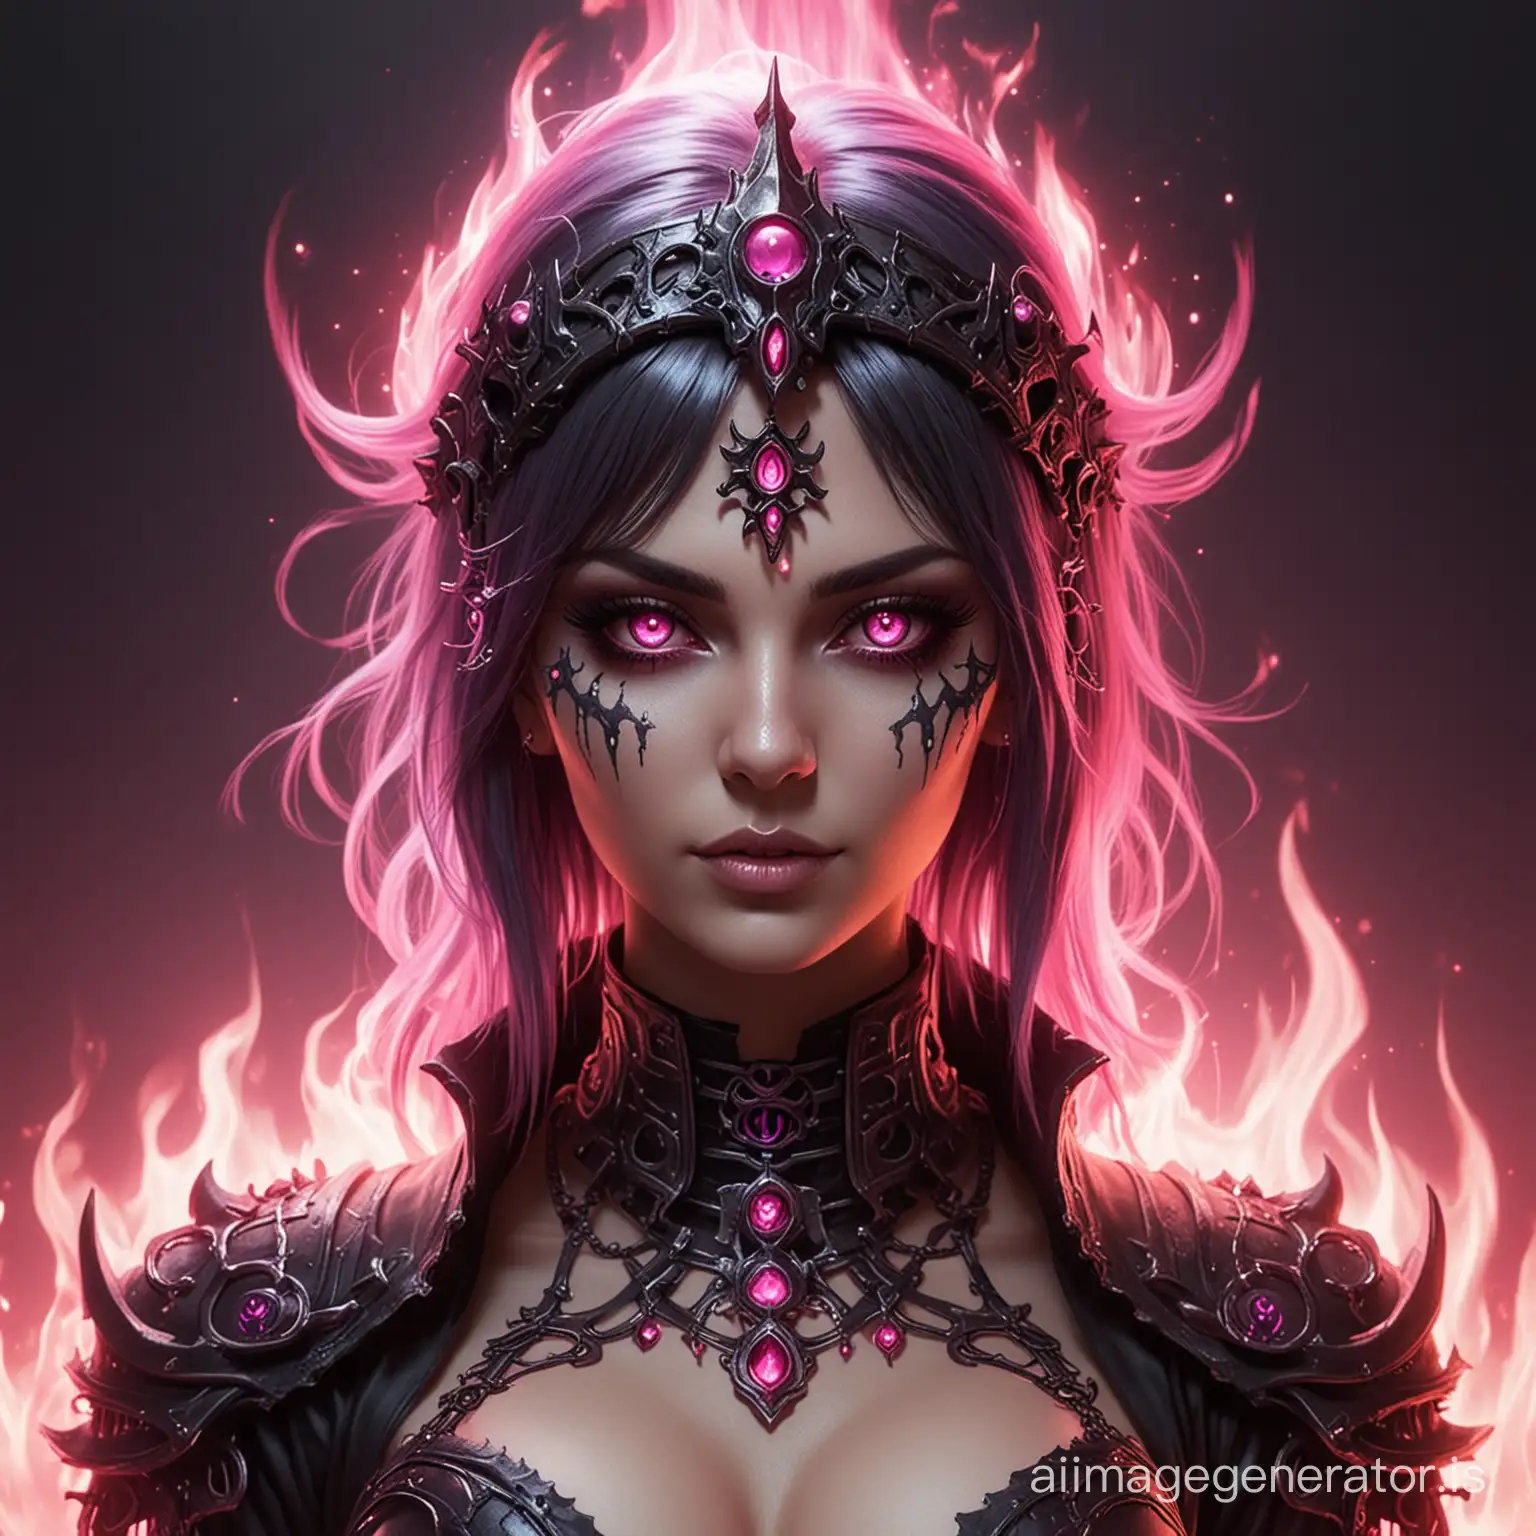 Seductive-Necromancer-Transforms-into-Lich-with-Fiery-Pink-Eyes